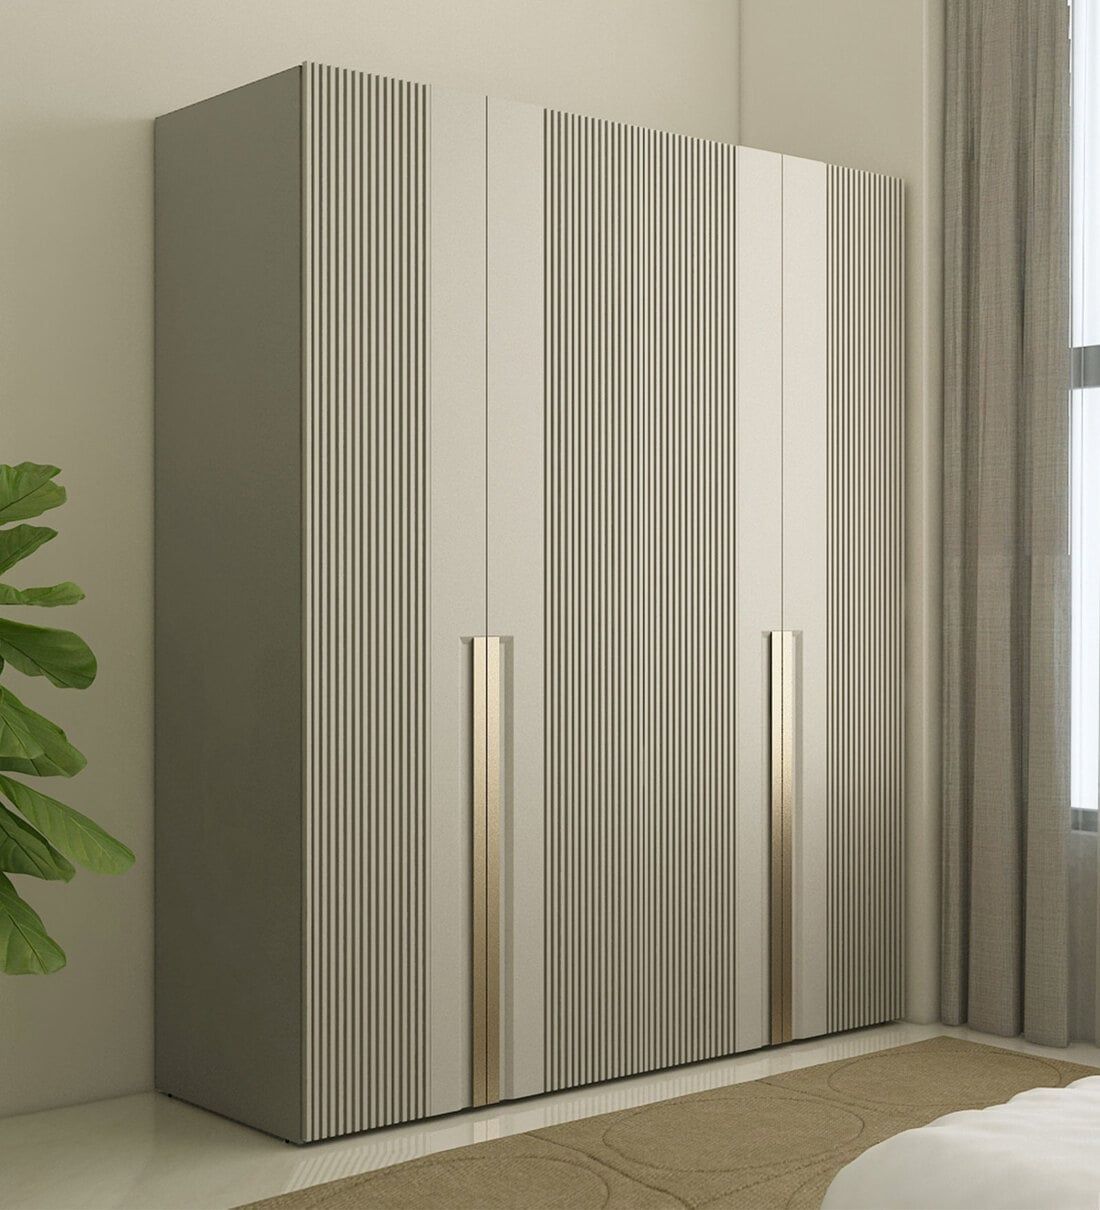 Buy Astor Modern 4 Door Wardrobe In Cashmere Colour With Stripes At 26% Off Spacewood | Pepperfry Regarding Wardrobes With 4 Doors (View 12 of 15)